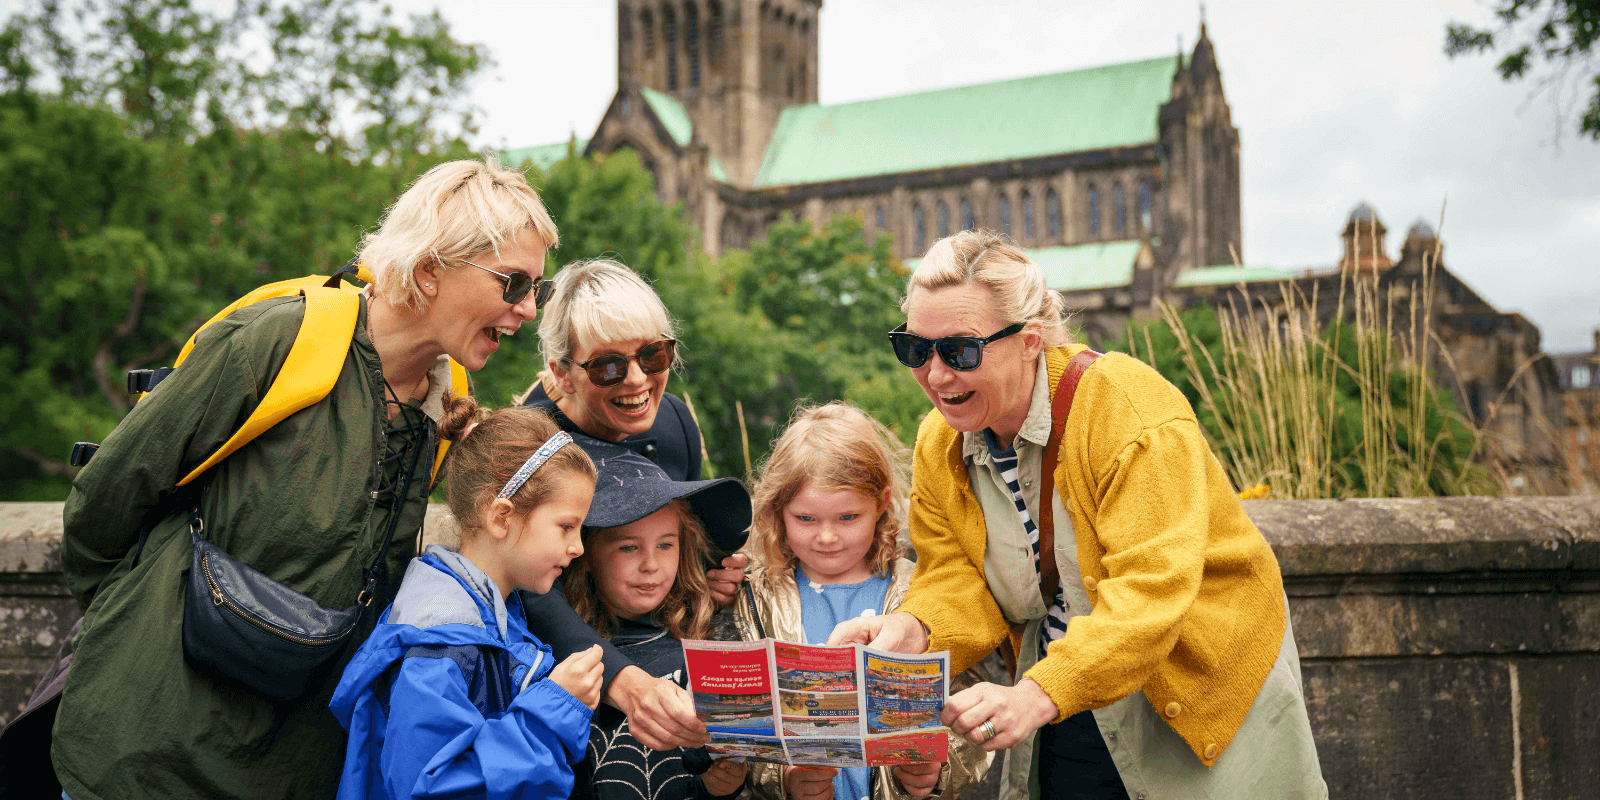 Tourists smiling while looking at tour map